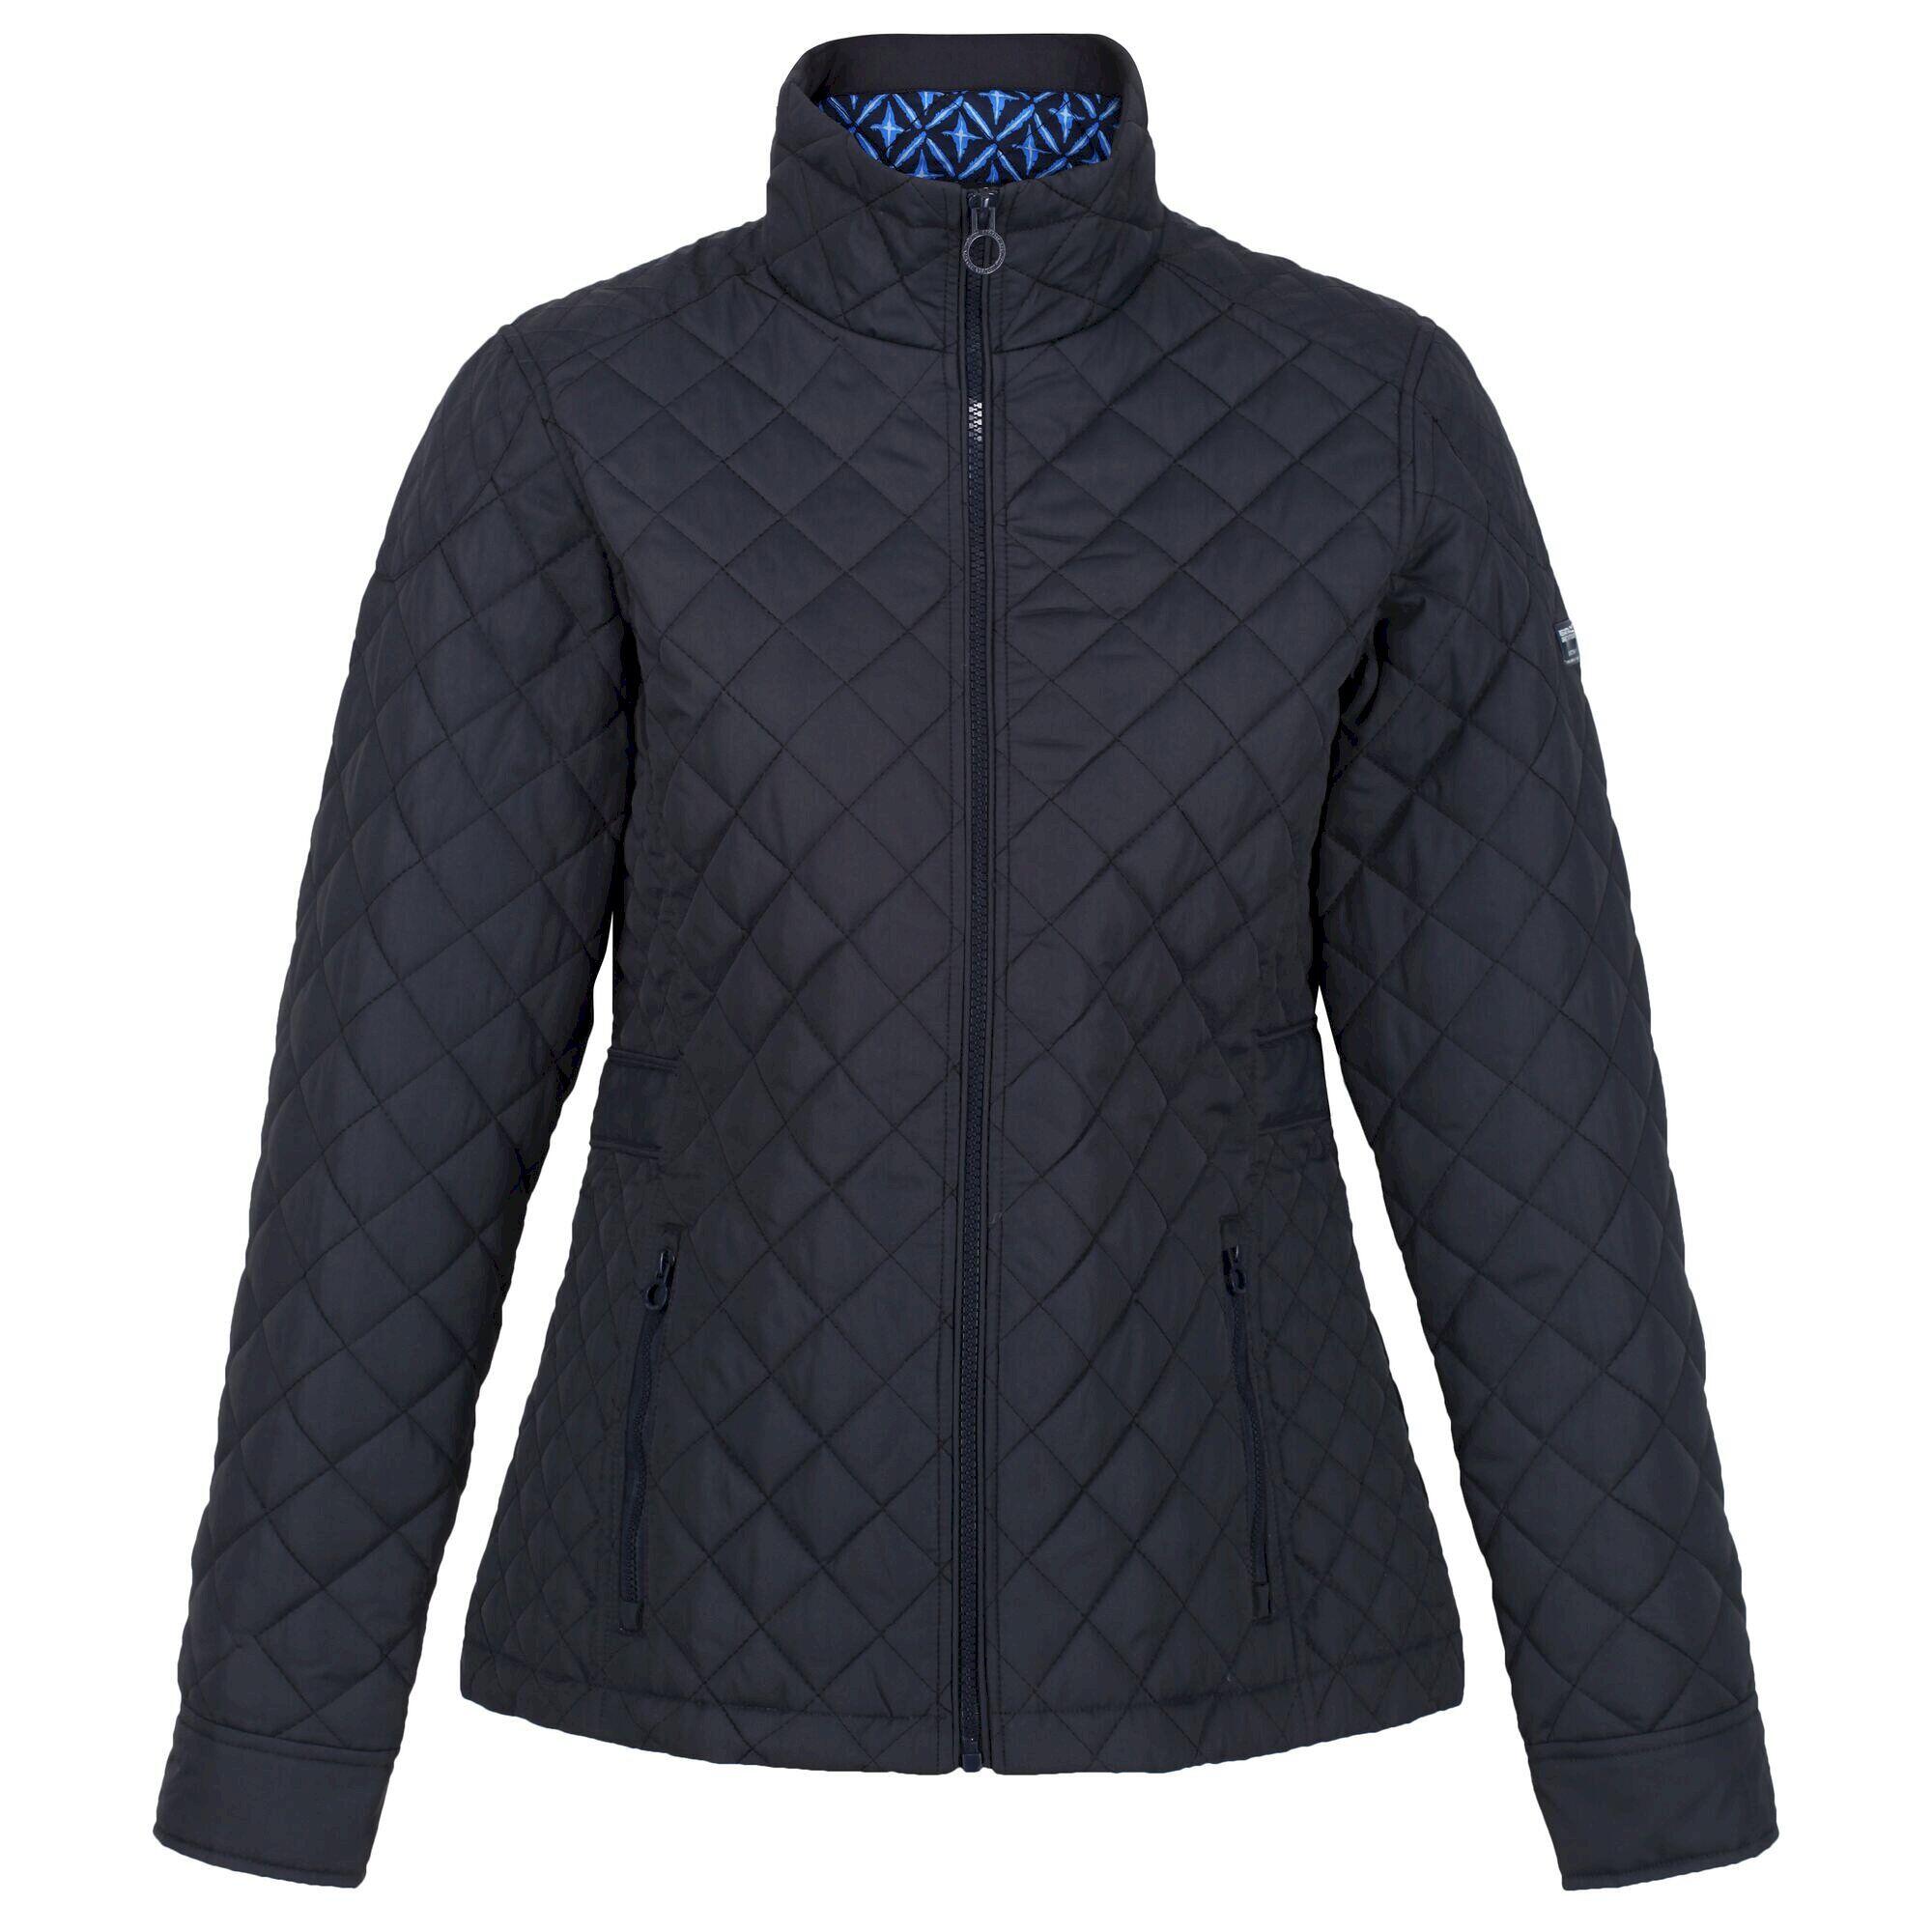 REGATTA Womens/Ladies Charleigh Quilted Insulated Jacket (Navy Tile)